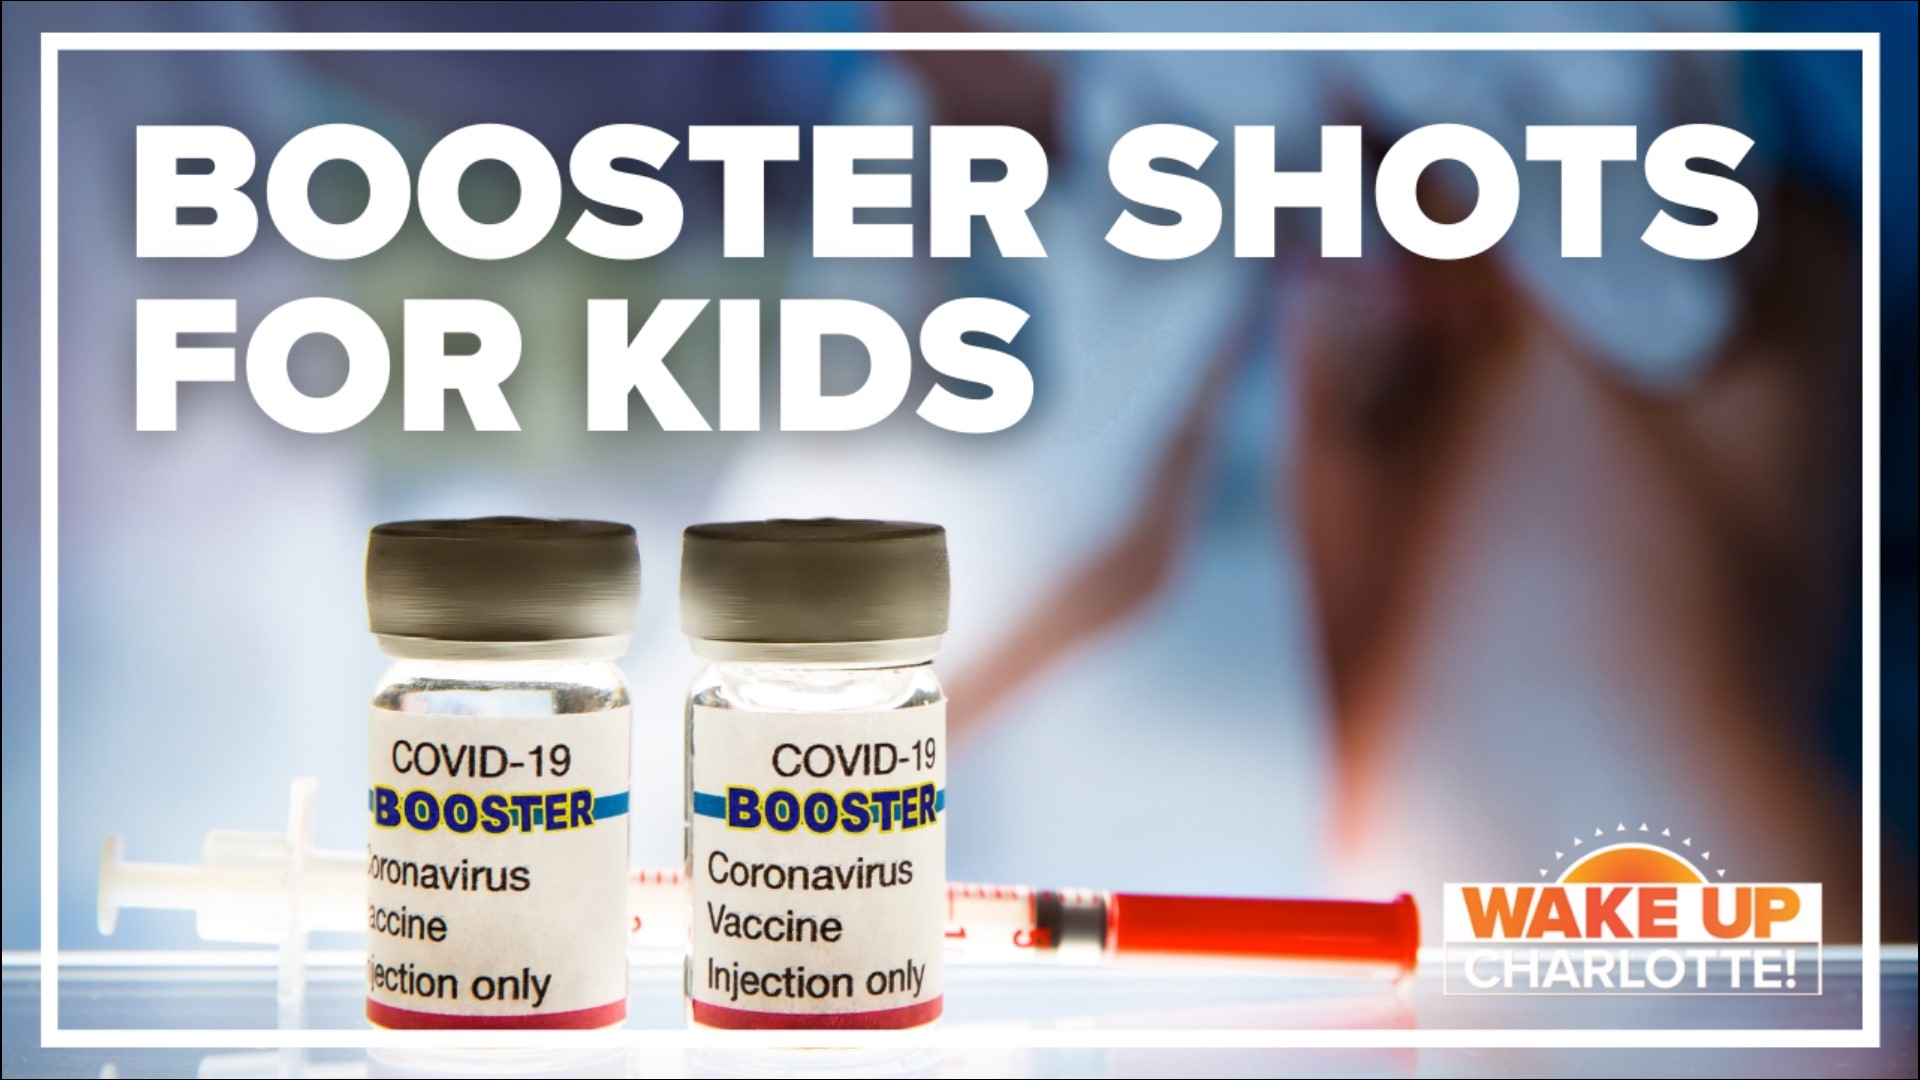 Both branches of the Mecklenburg County health department will offer the Pfizer COVID-19 booster to children ages 5 to 11.